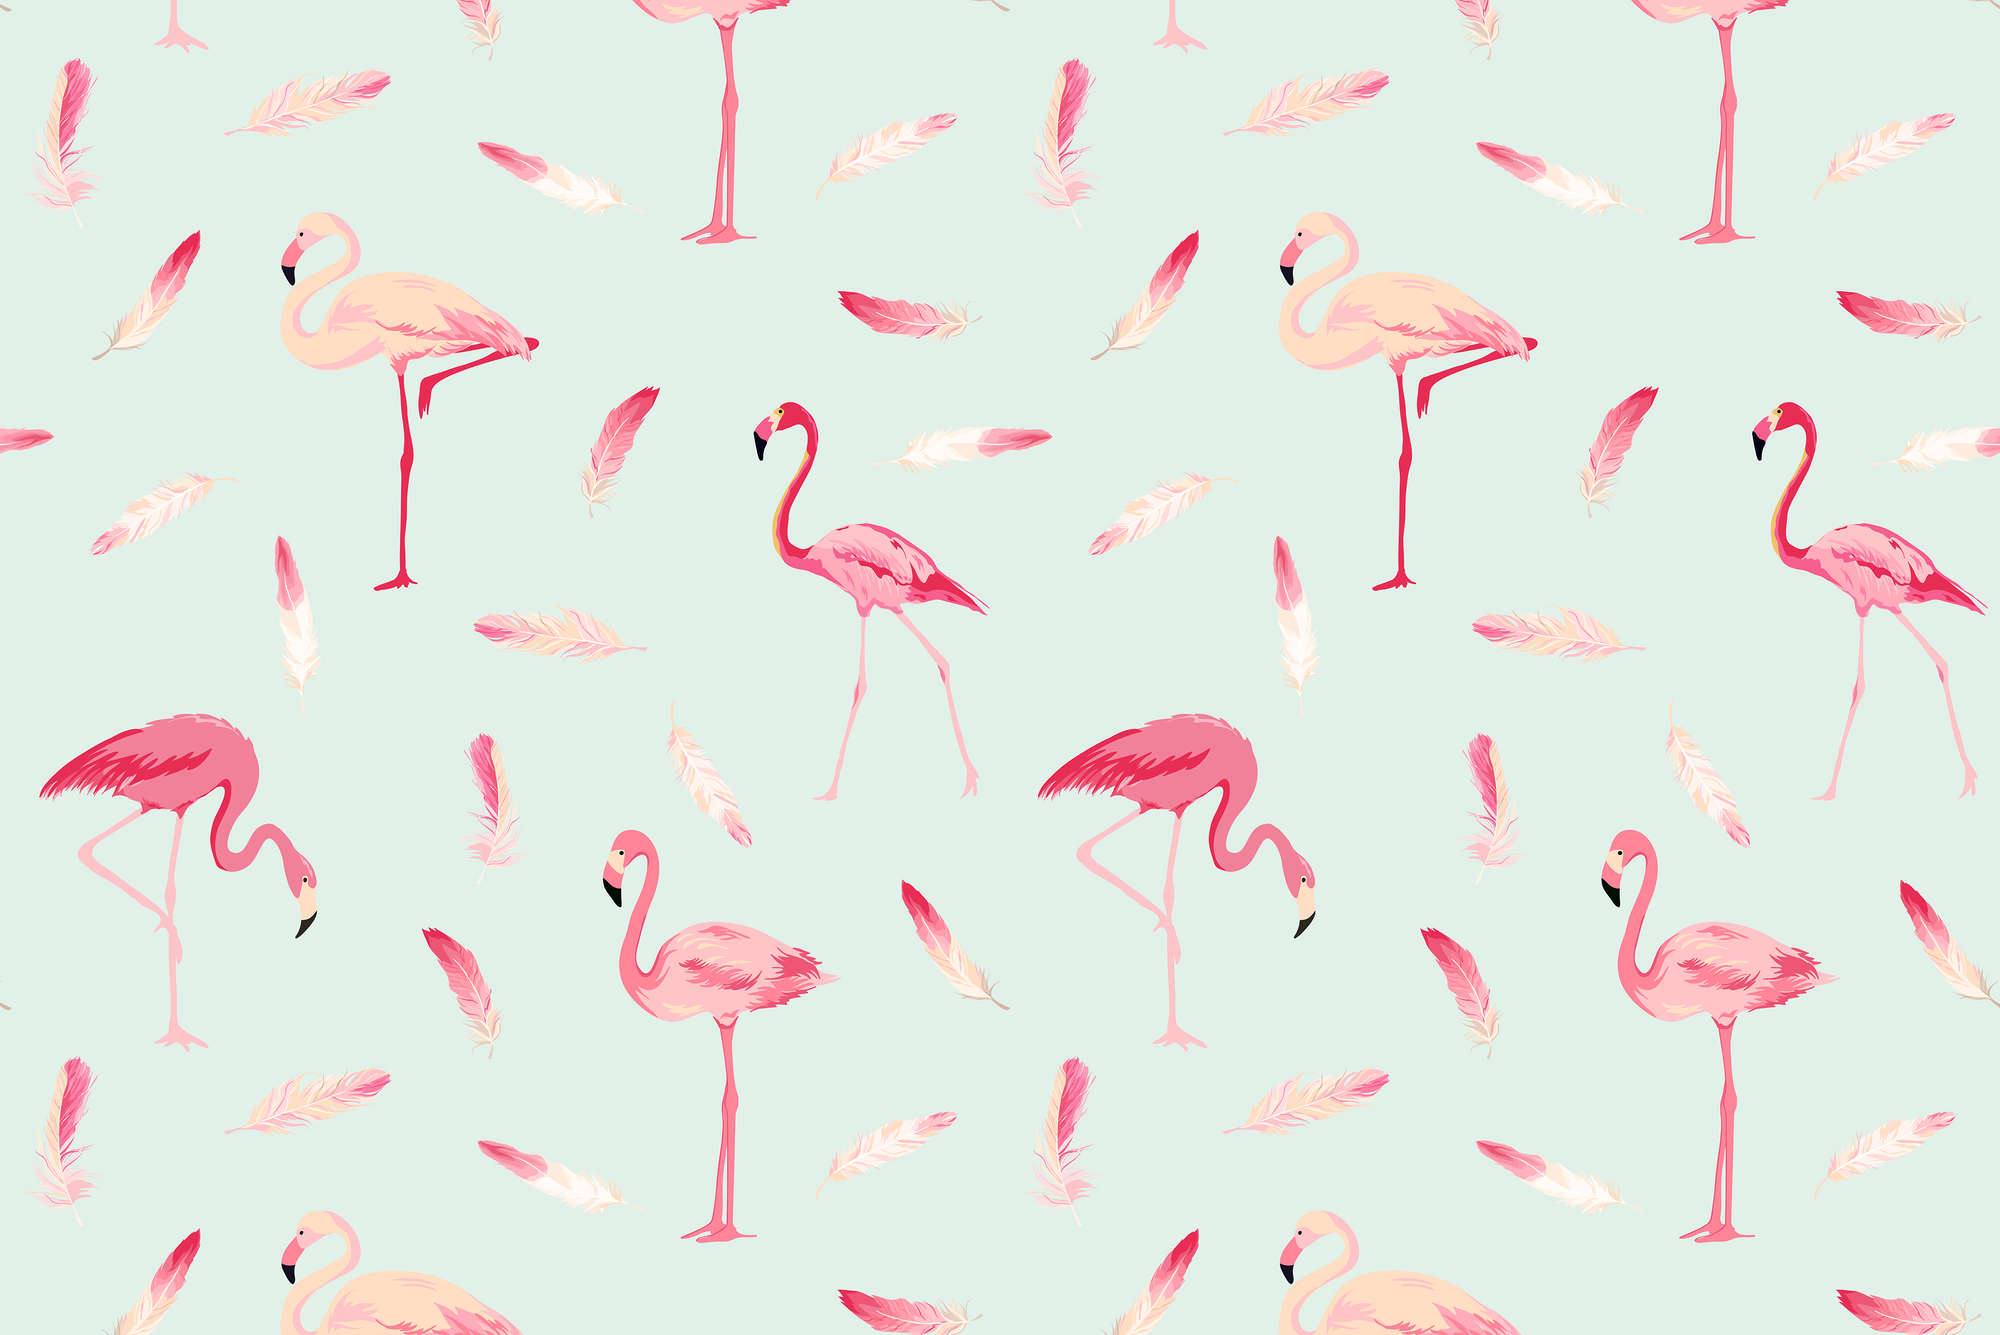             Graphic mural flamingos and feathers on textured nonwoven
        